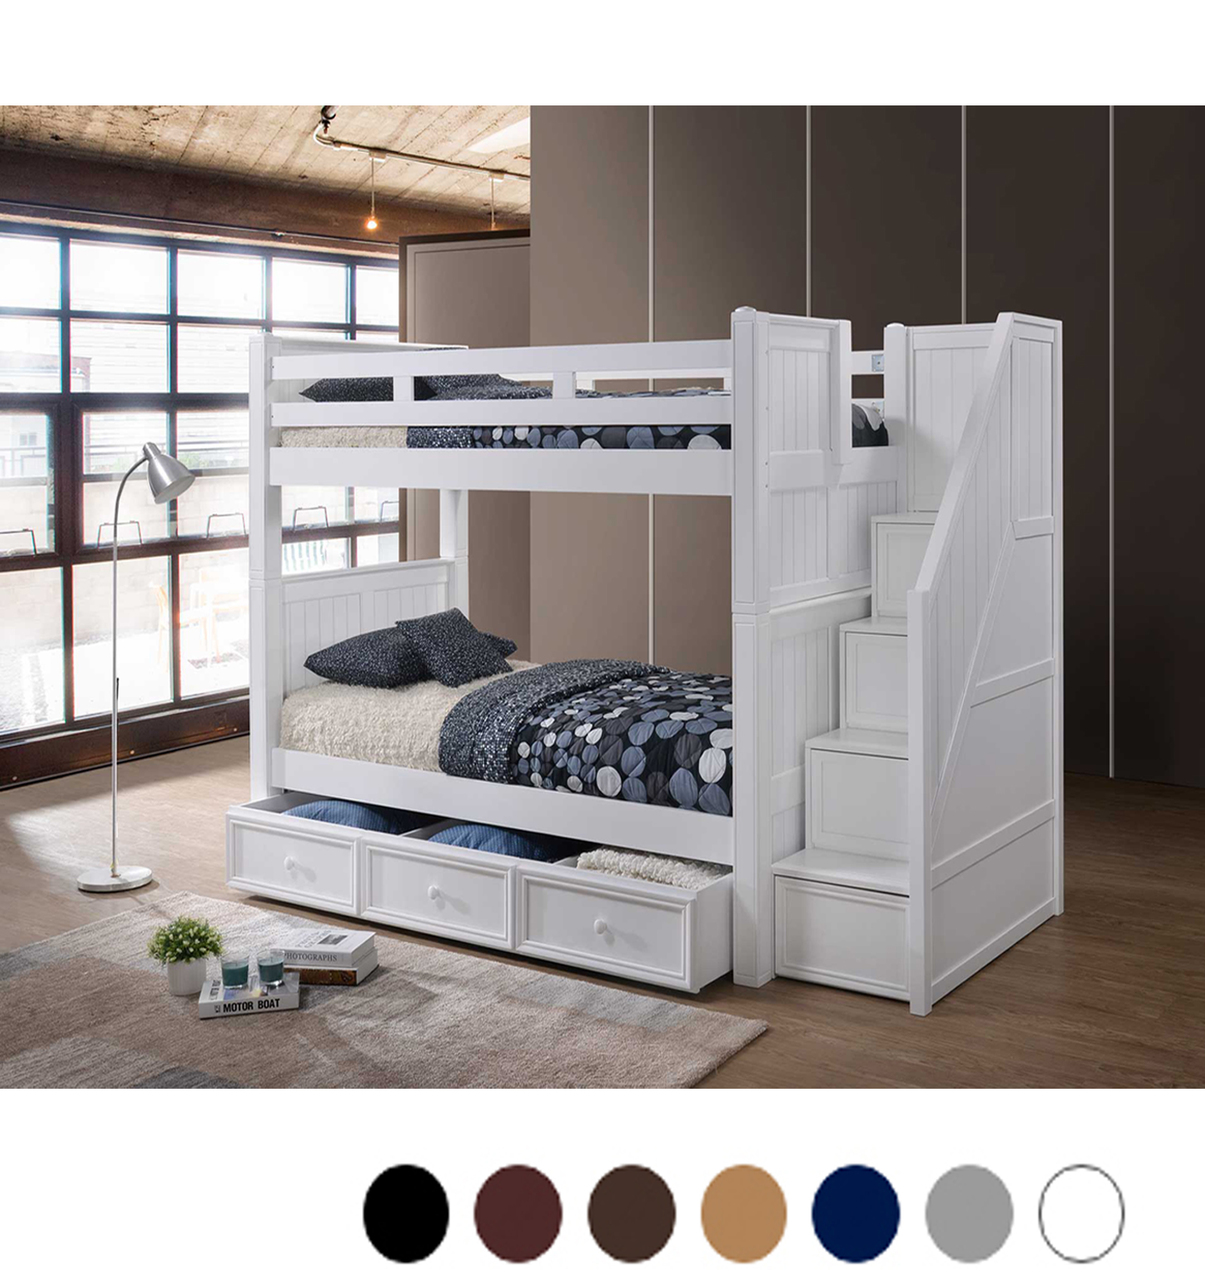 twin bunk beds with stairs and storage